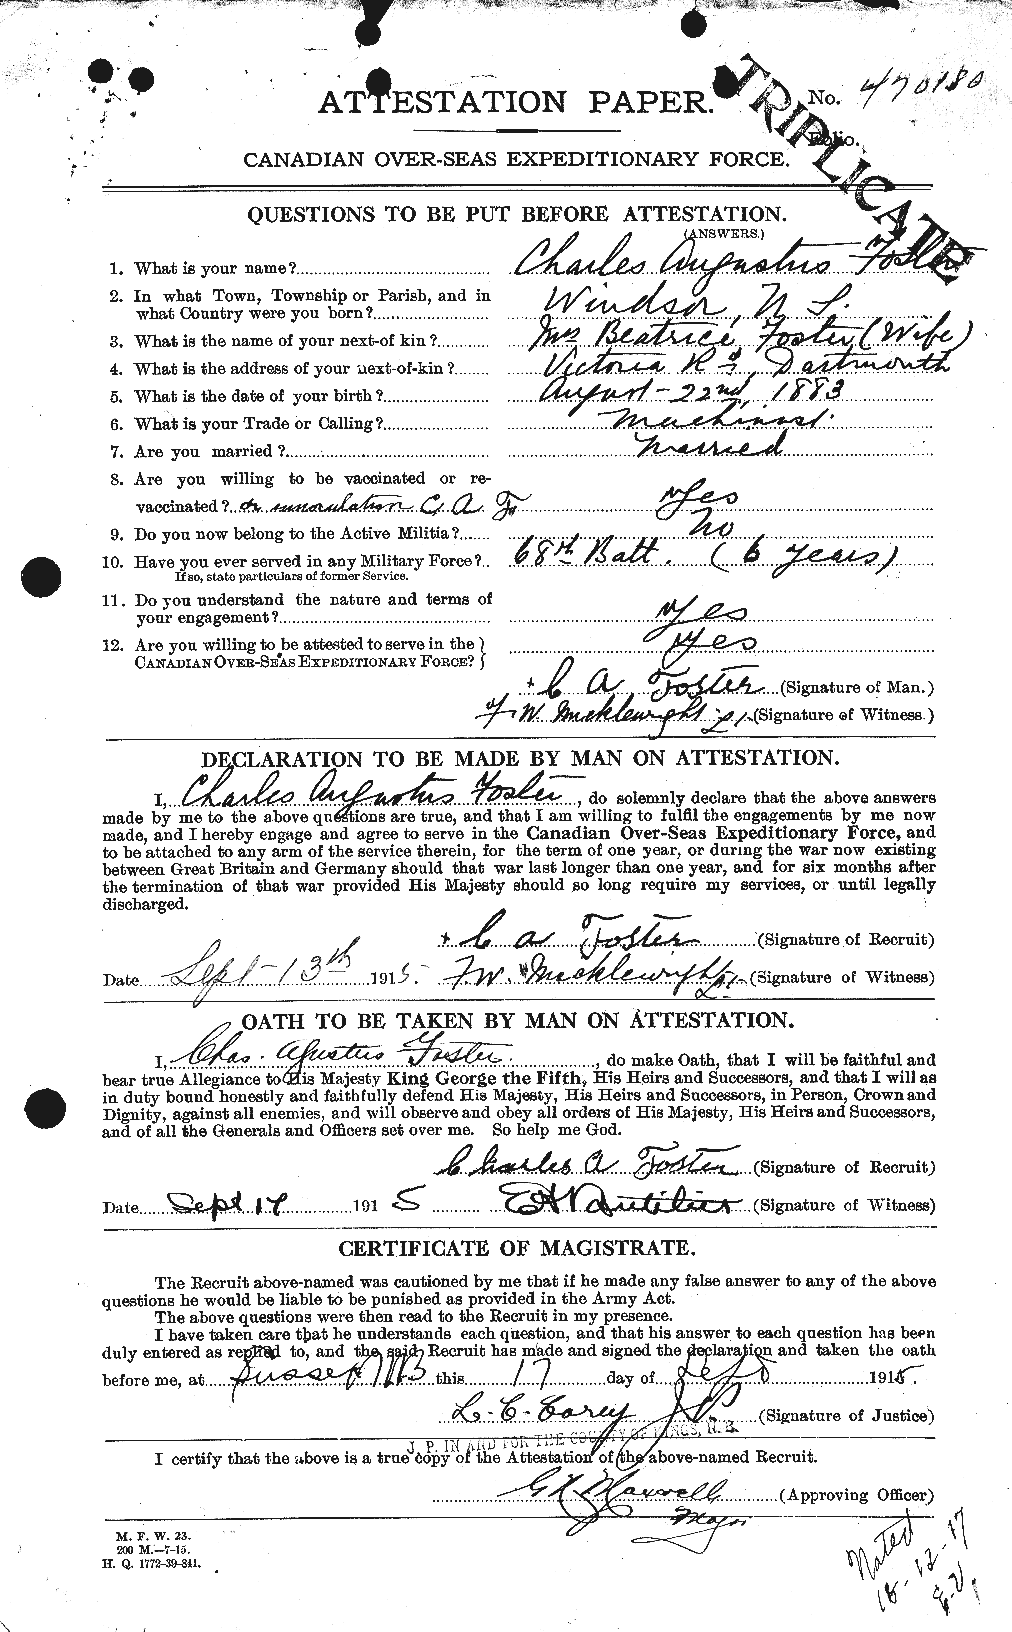 Personnel Records of the First World War - CEF 330506a